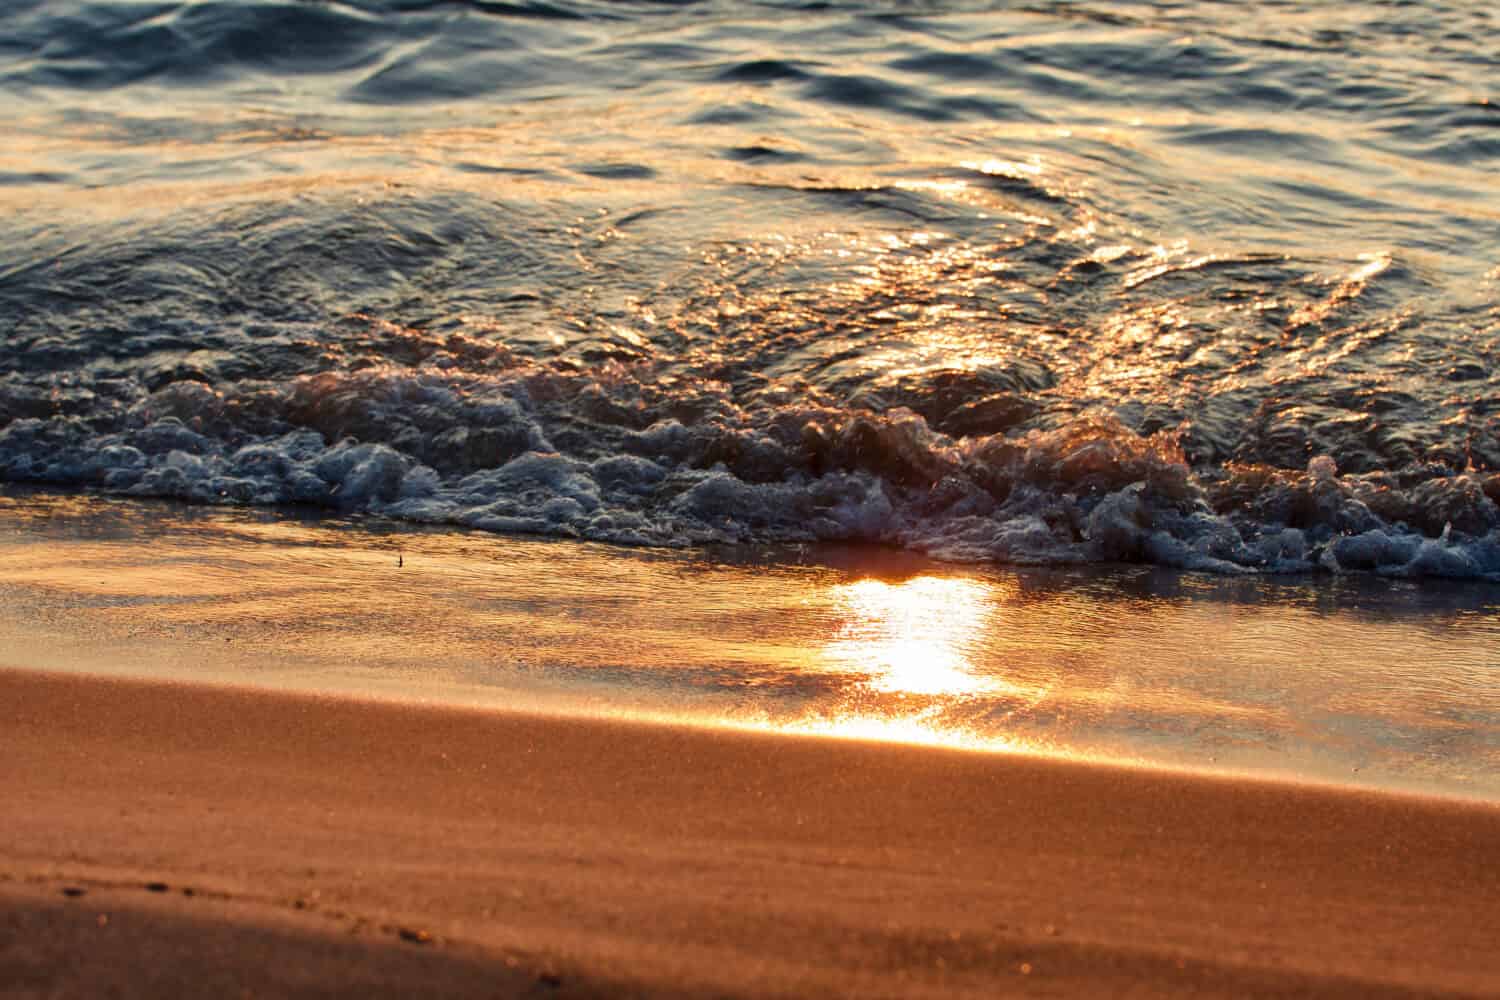 Reflection of the sun in the sand and waves on a beach of Lake Michigan